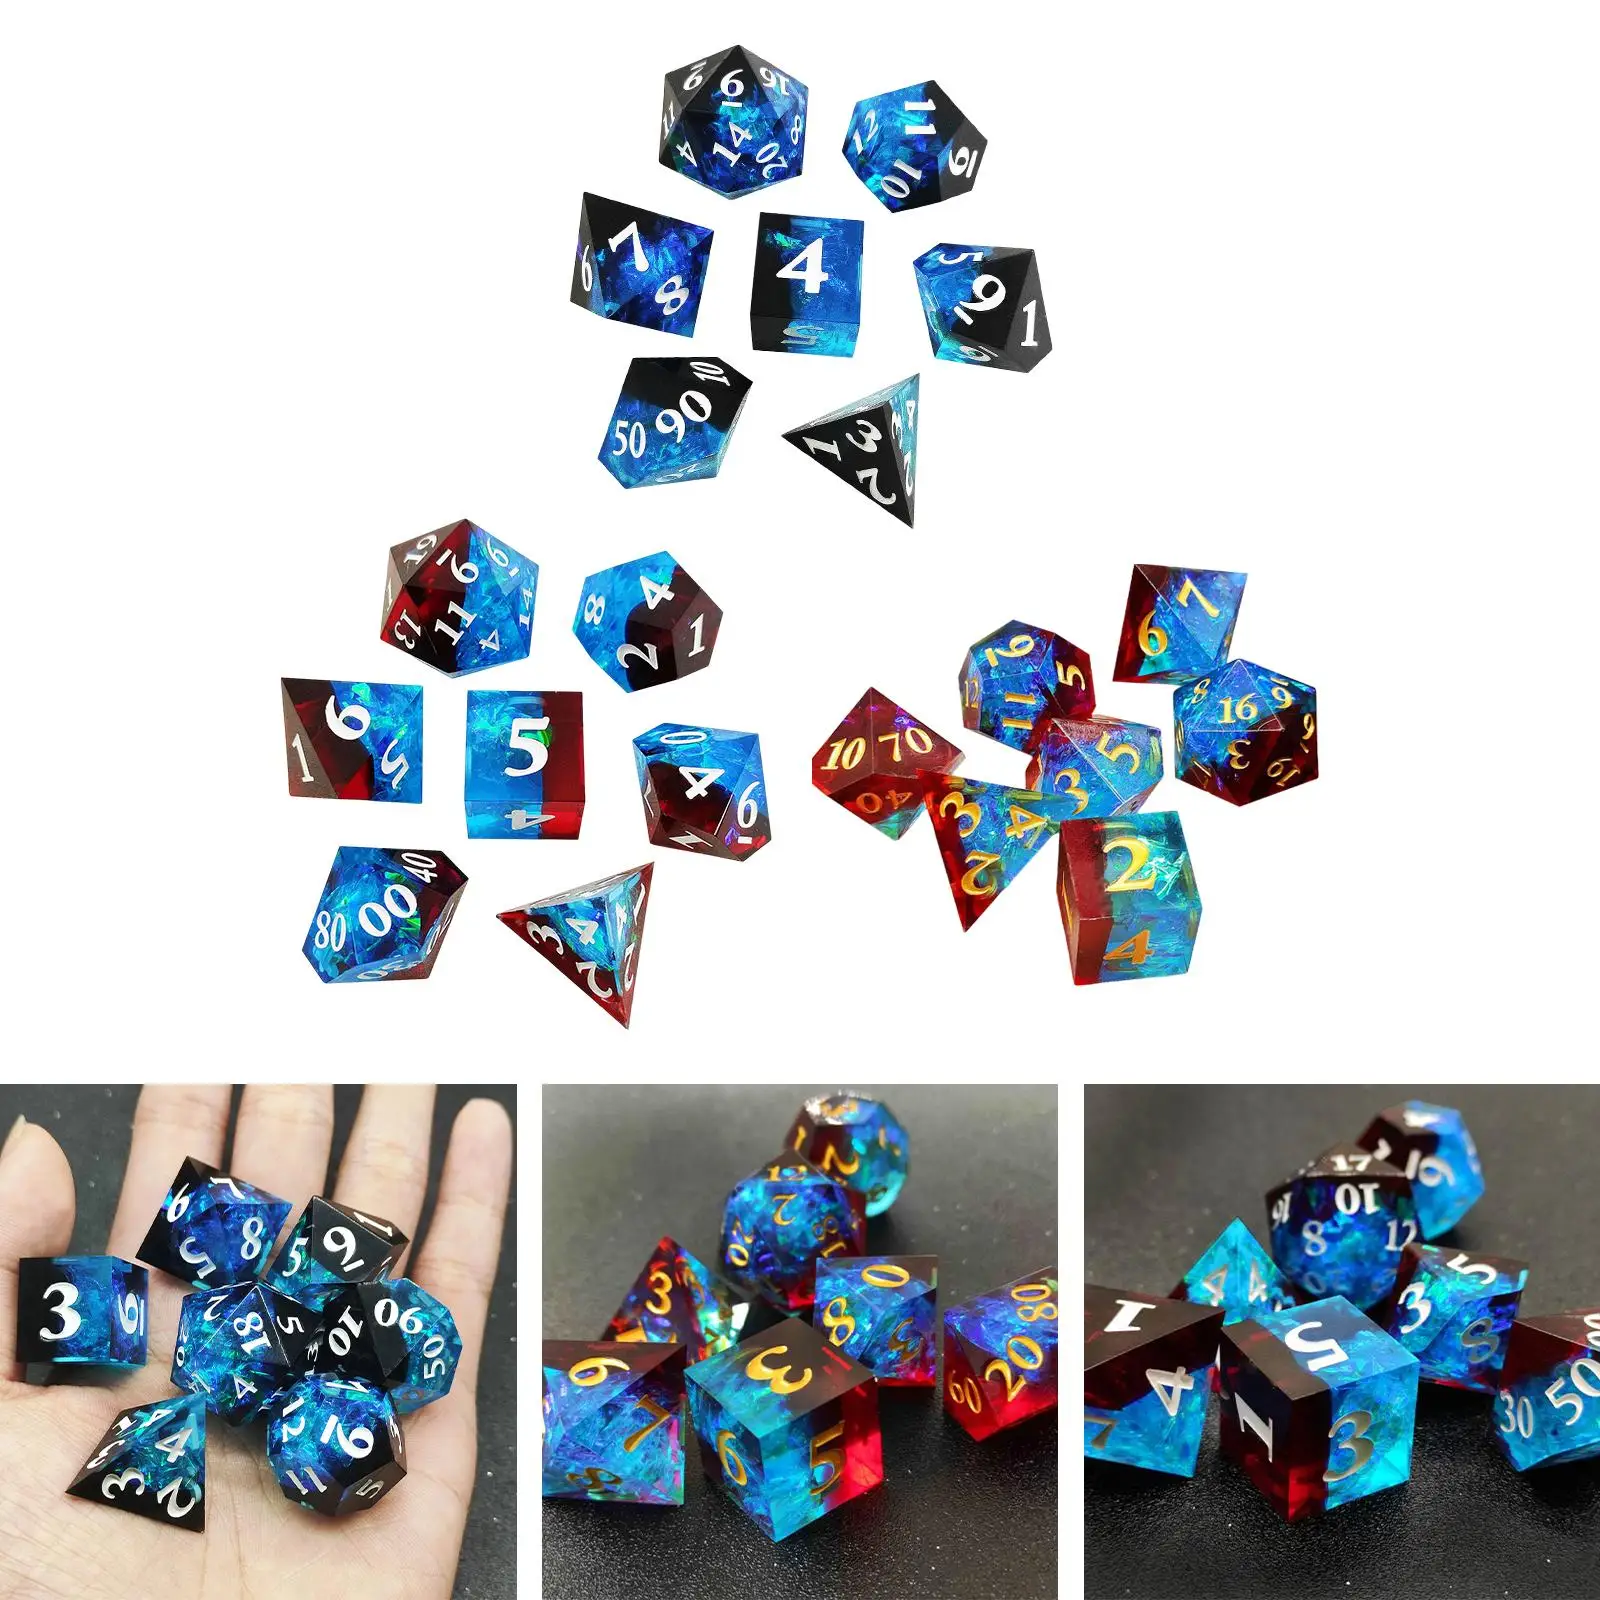 7x Polyhedral Dice D4 D6 D8 D10 D12 D20 Play Entertainment Toys Table Game for Role Playing Game Party Bar Family Gathering Cafe